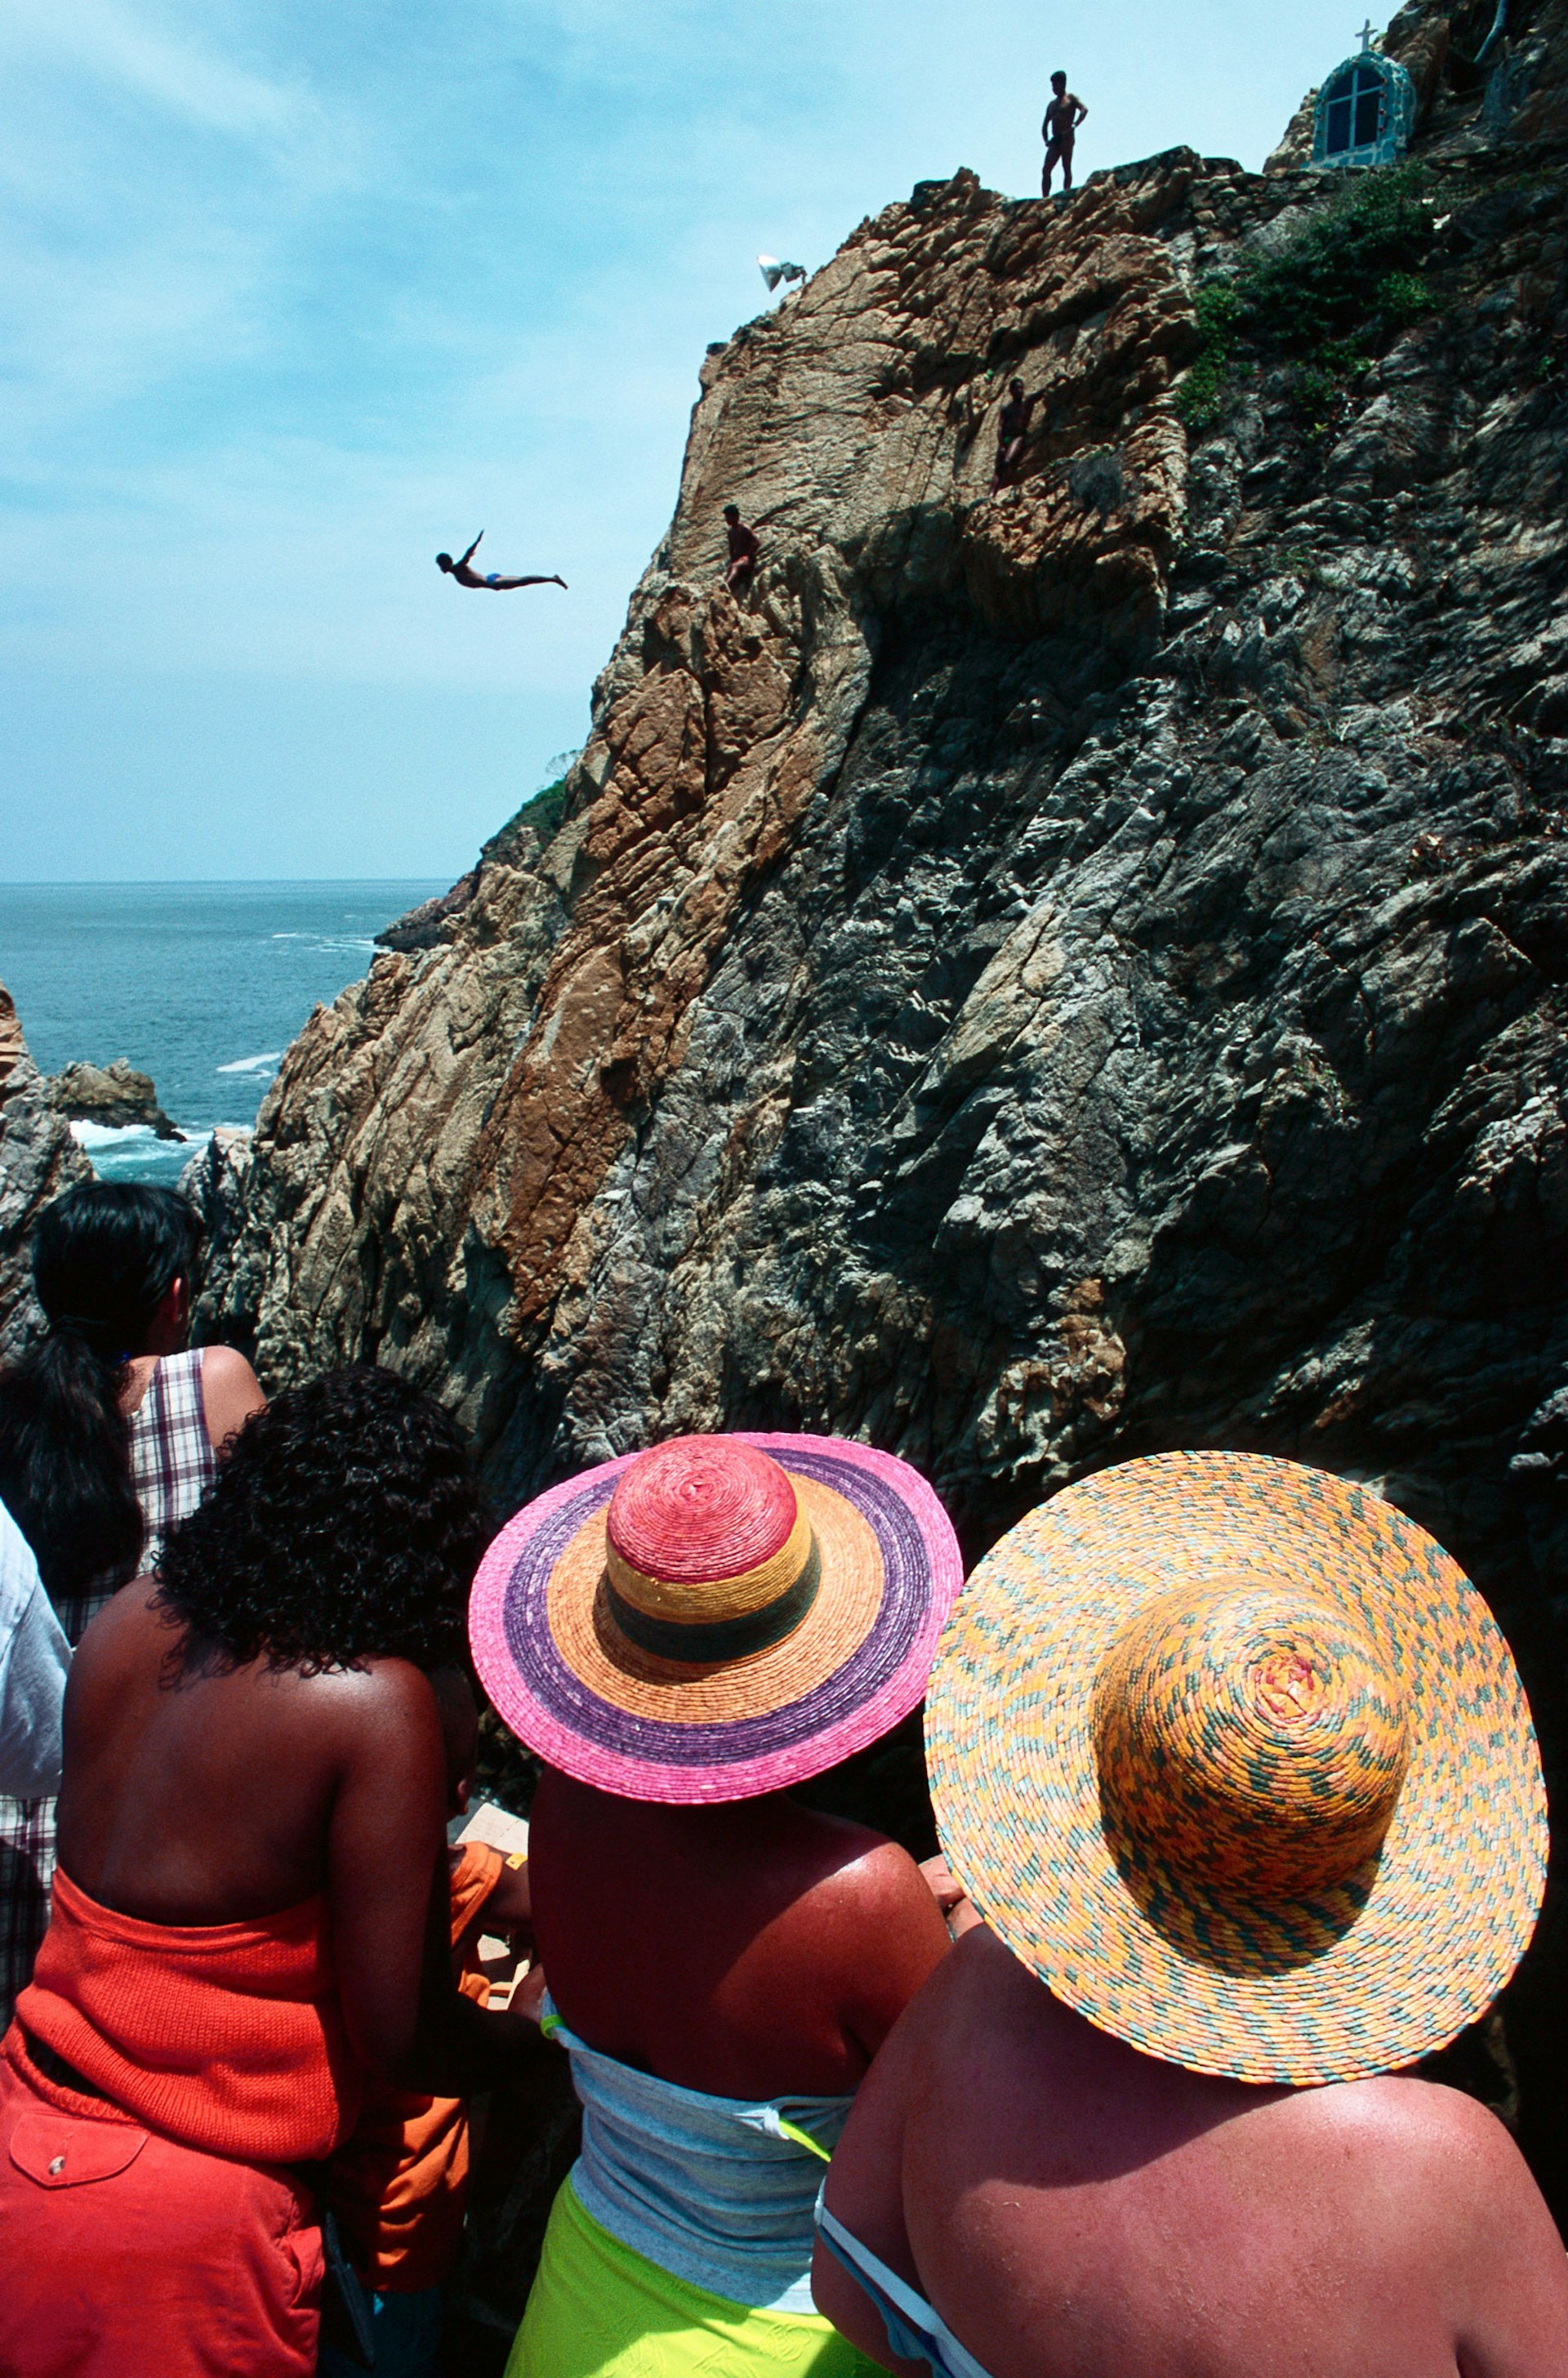 Three women in sun hats watch men dive from a high cliff into the ocean